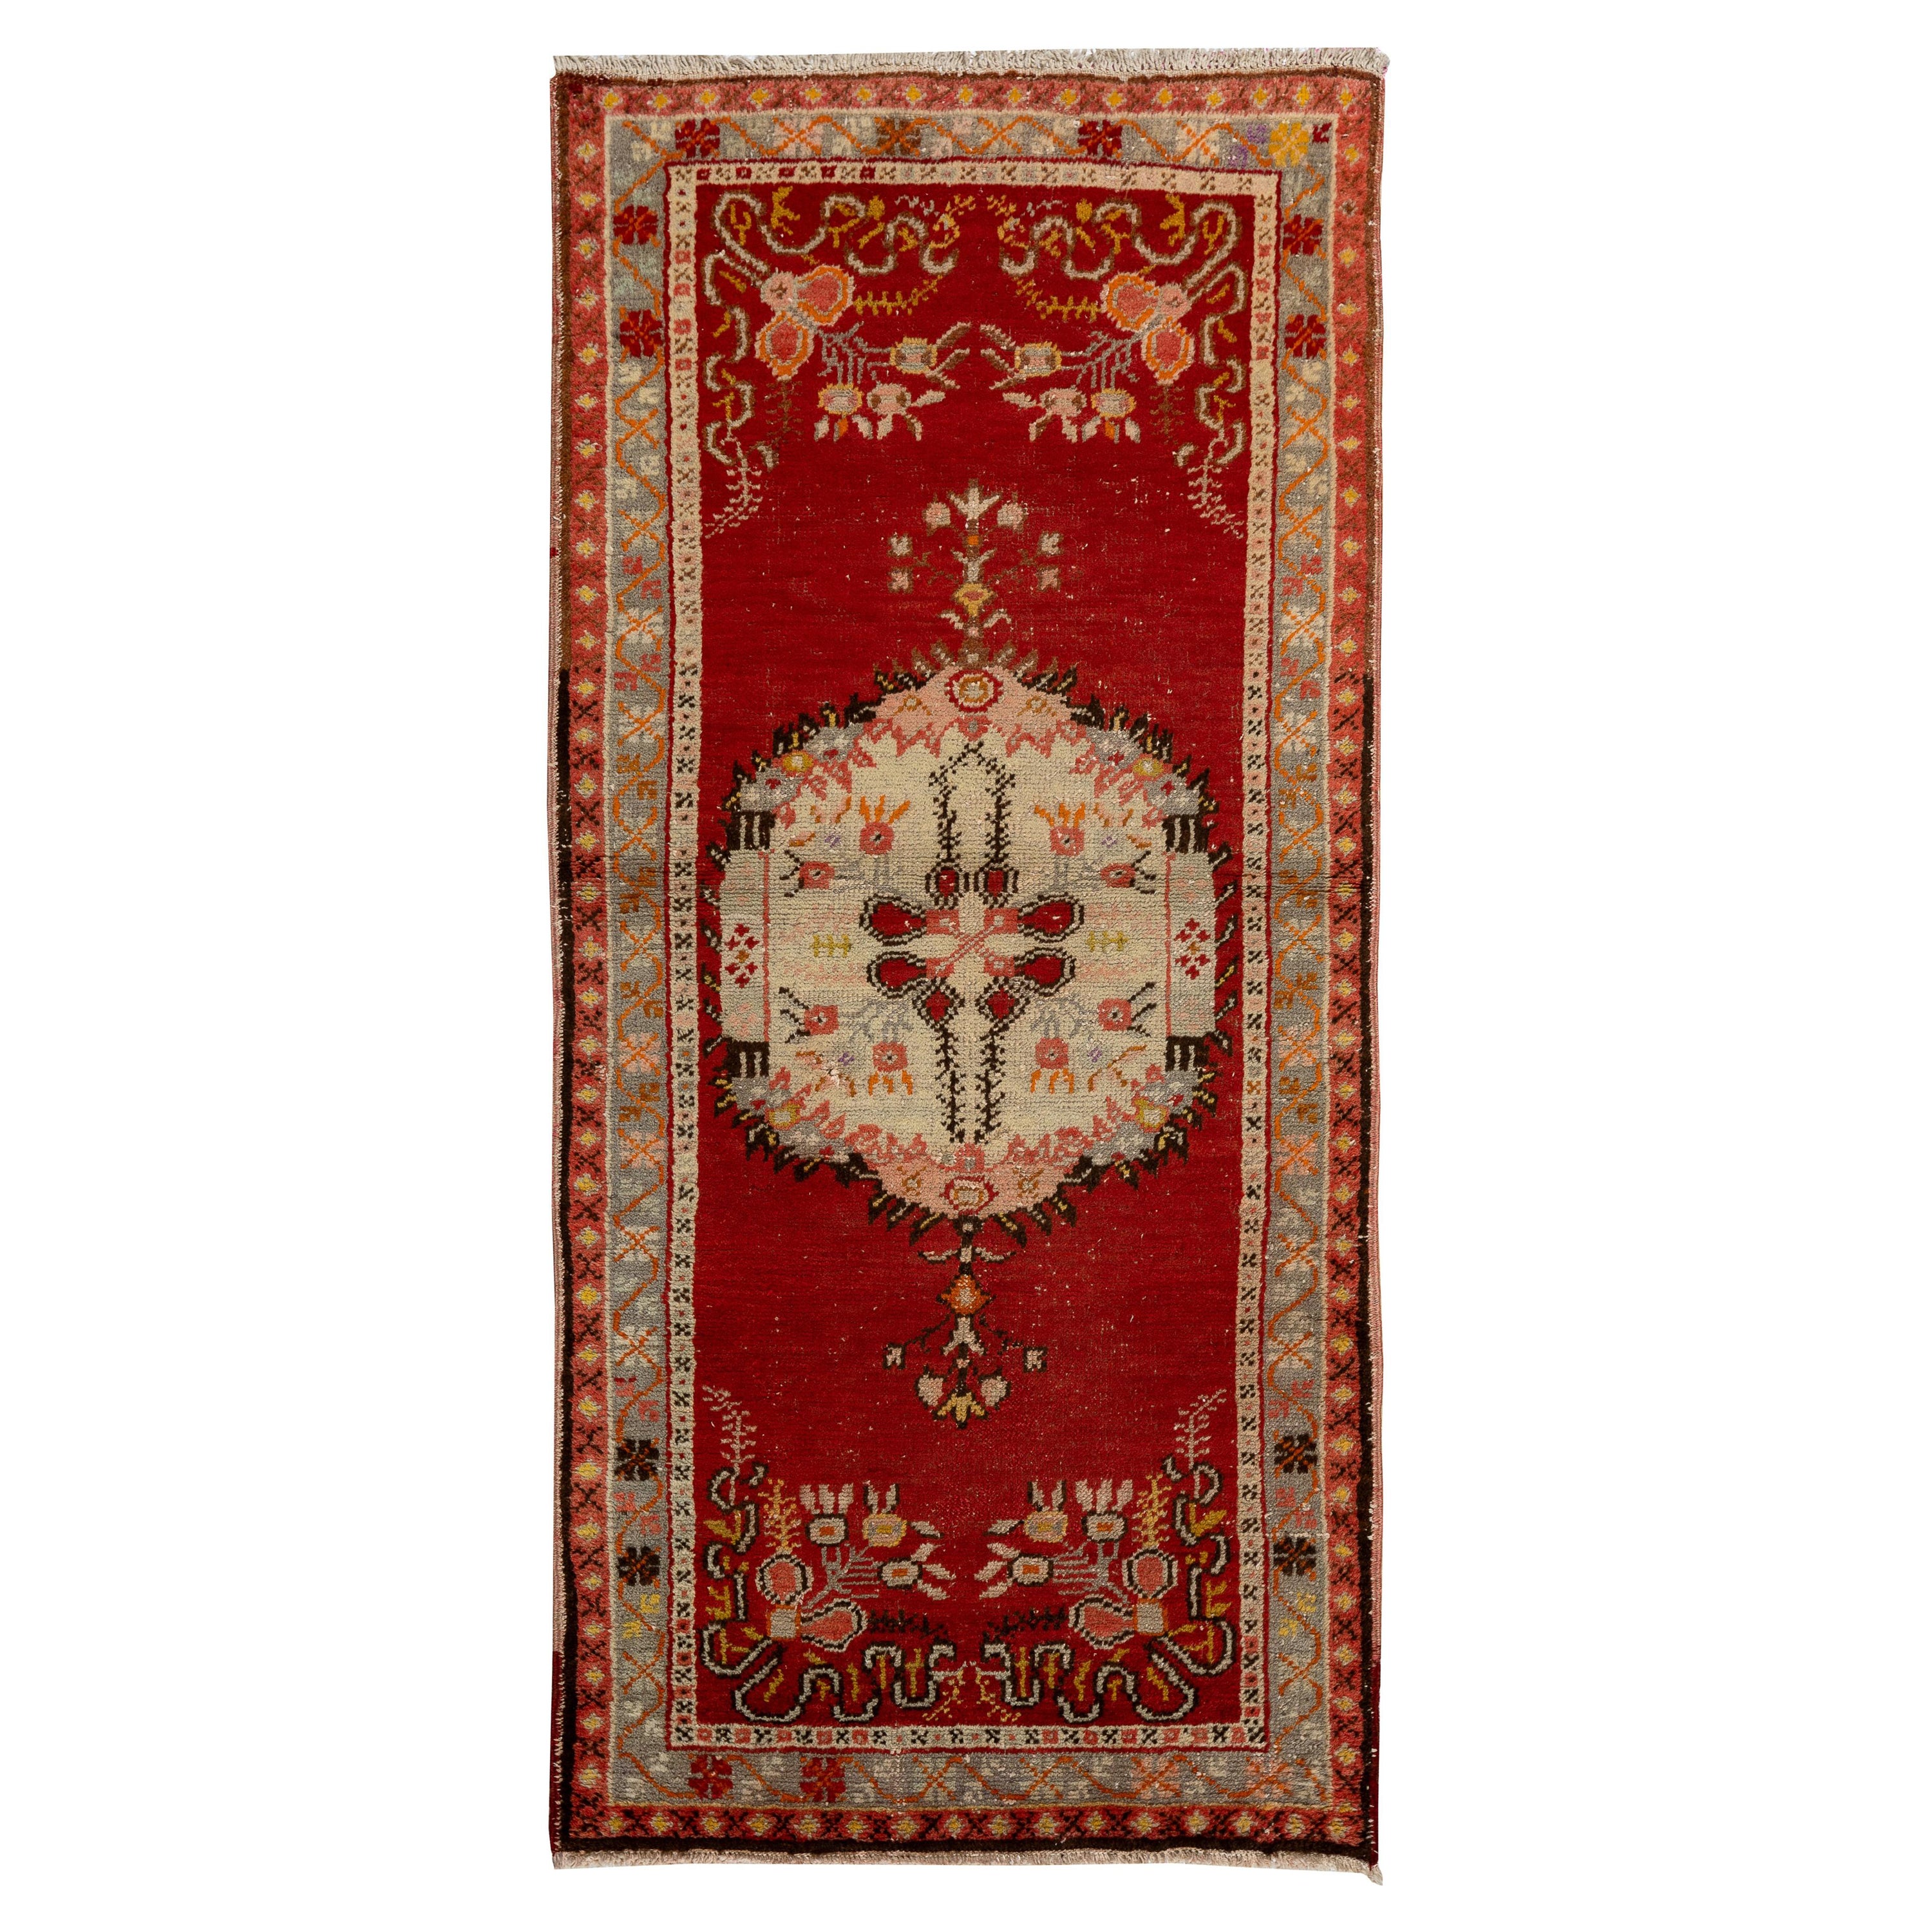 2.8x5.8 Ft Mid-Century Handmade Anatolian Accent Rug in Red and Beige Colors